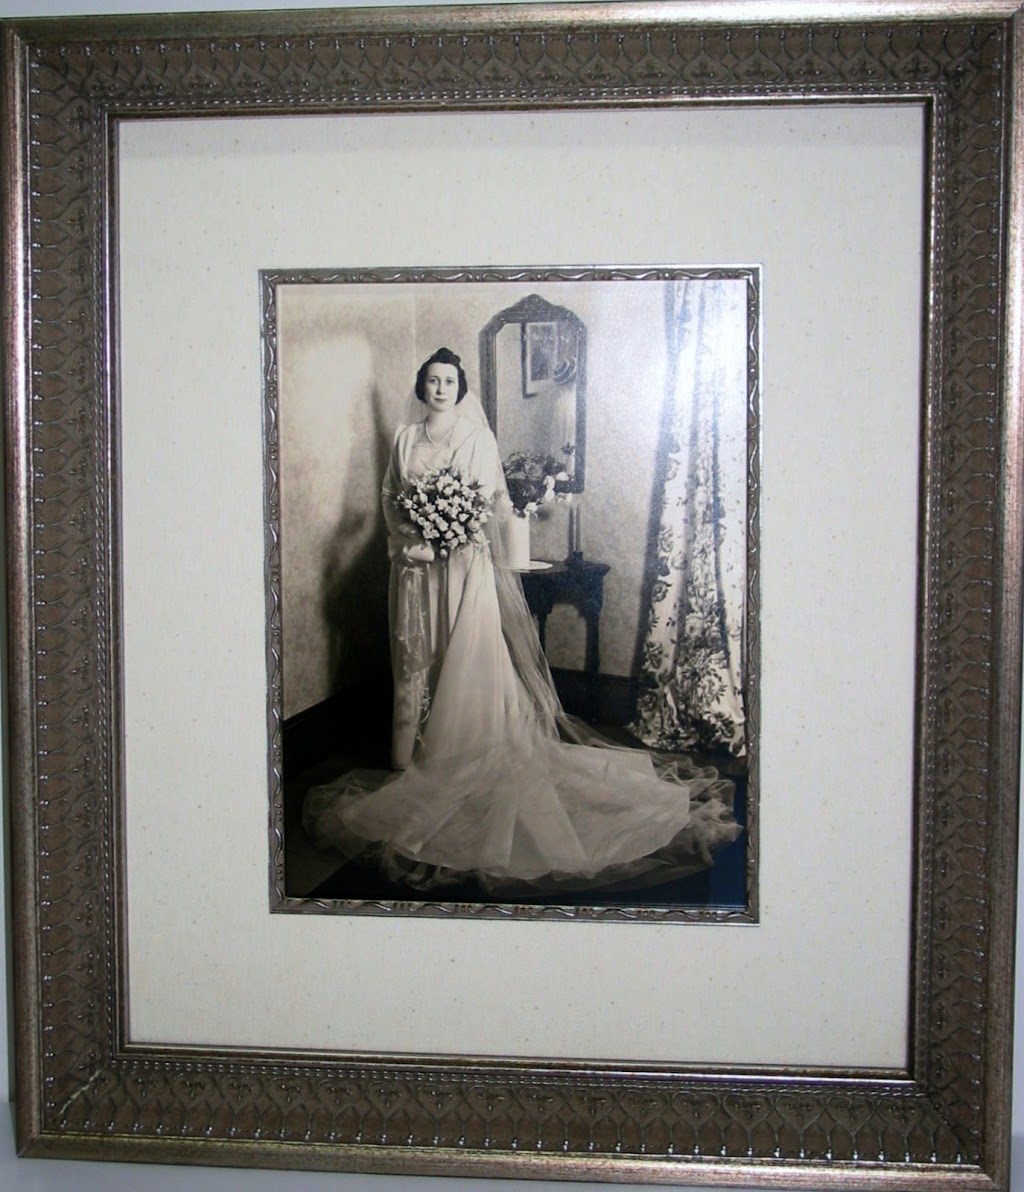 As You Like It Gallery & Frame Studio | 6140 Lower York Rd, New Hope, PA 18938 | Phone: (215) 794-2787